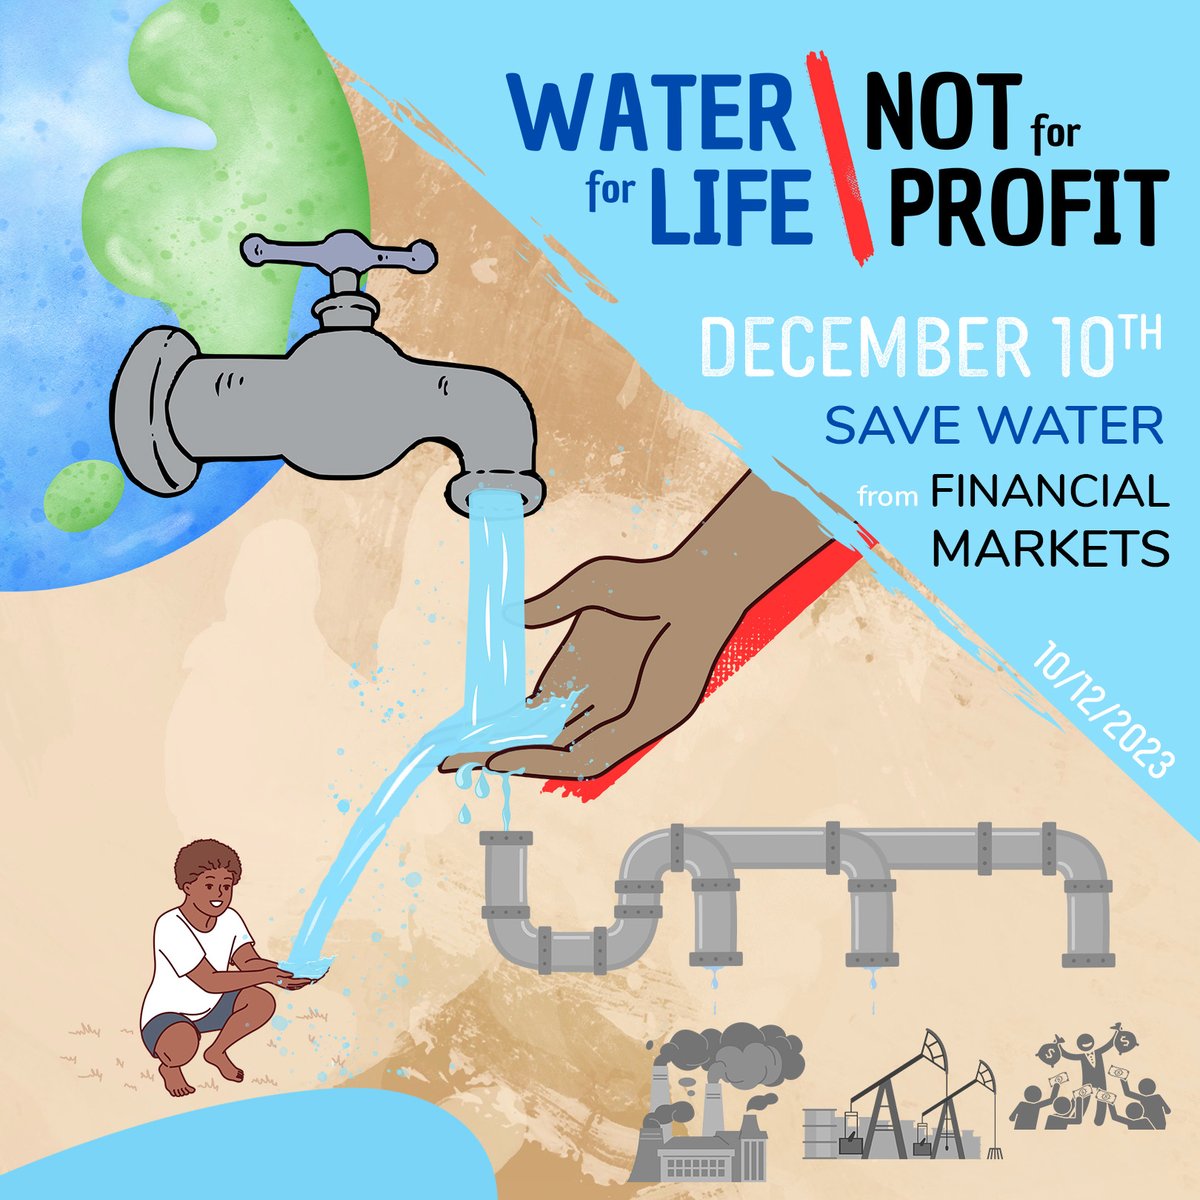 Launch of the #WaterForLifeNotForProfit campaign
💧≠💰
The entry of water in the stock market in 2020 poses serious risks to drinking water worldwide. Day 1 of the campaign, here is the first risk of the commodification of 💧 on the stock markets.

ℹ️: eausecours.org/waterforlifeno…